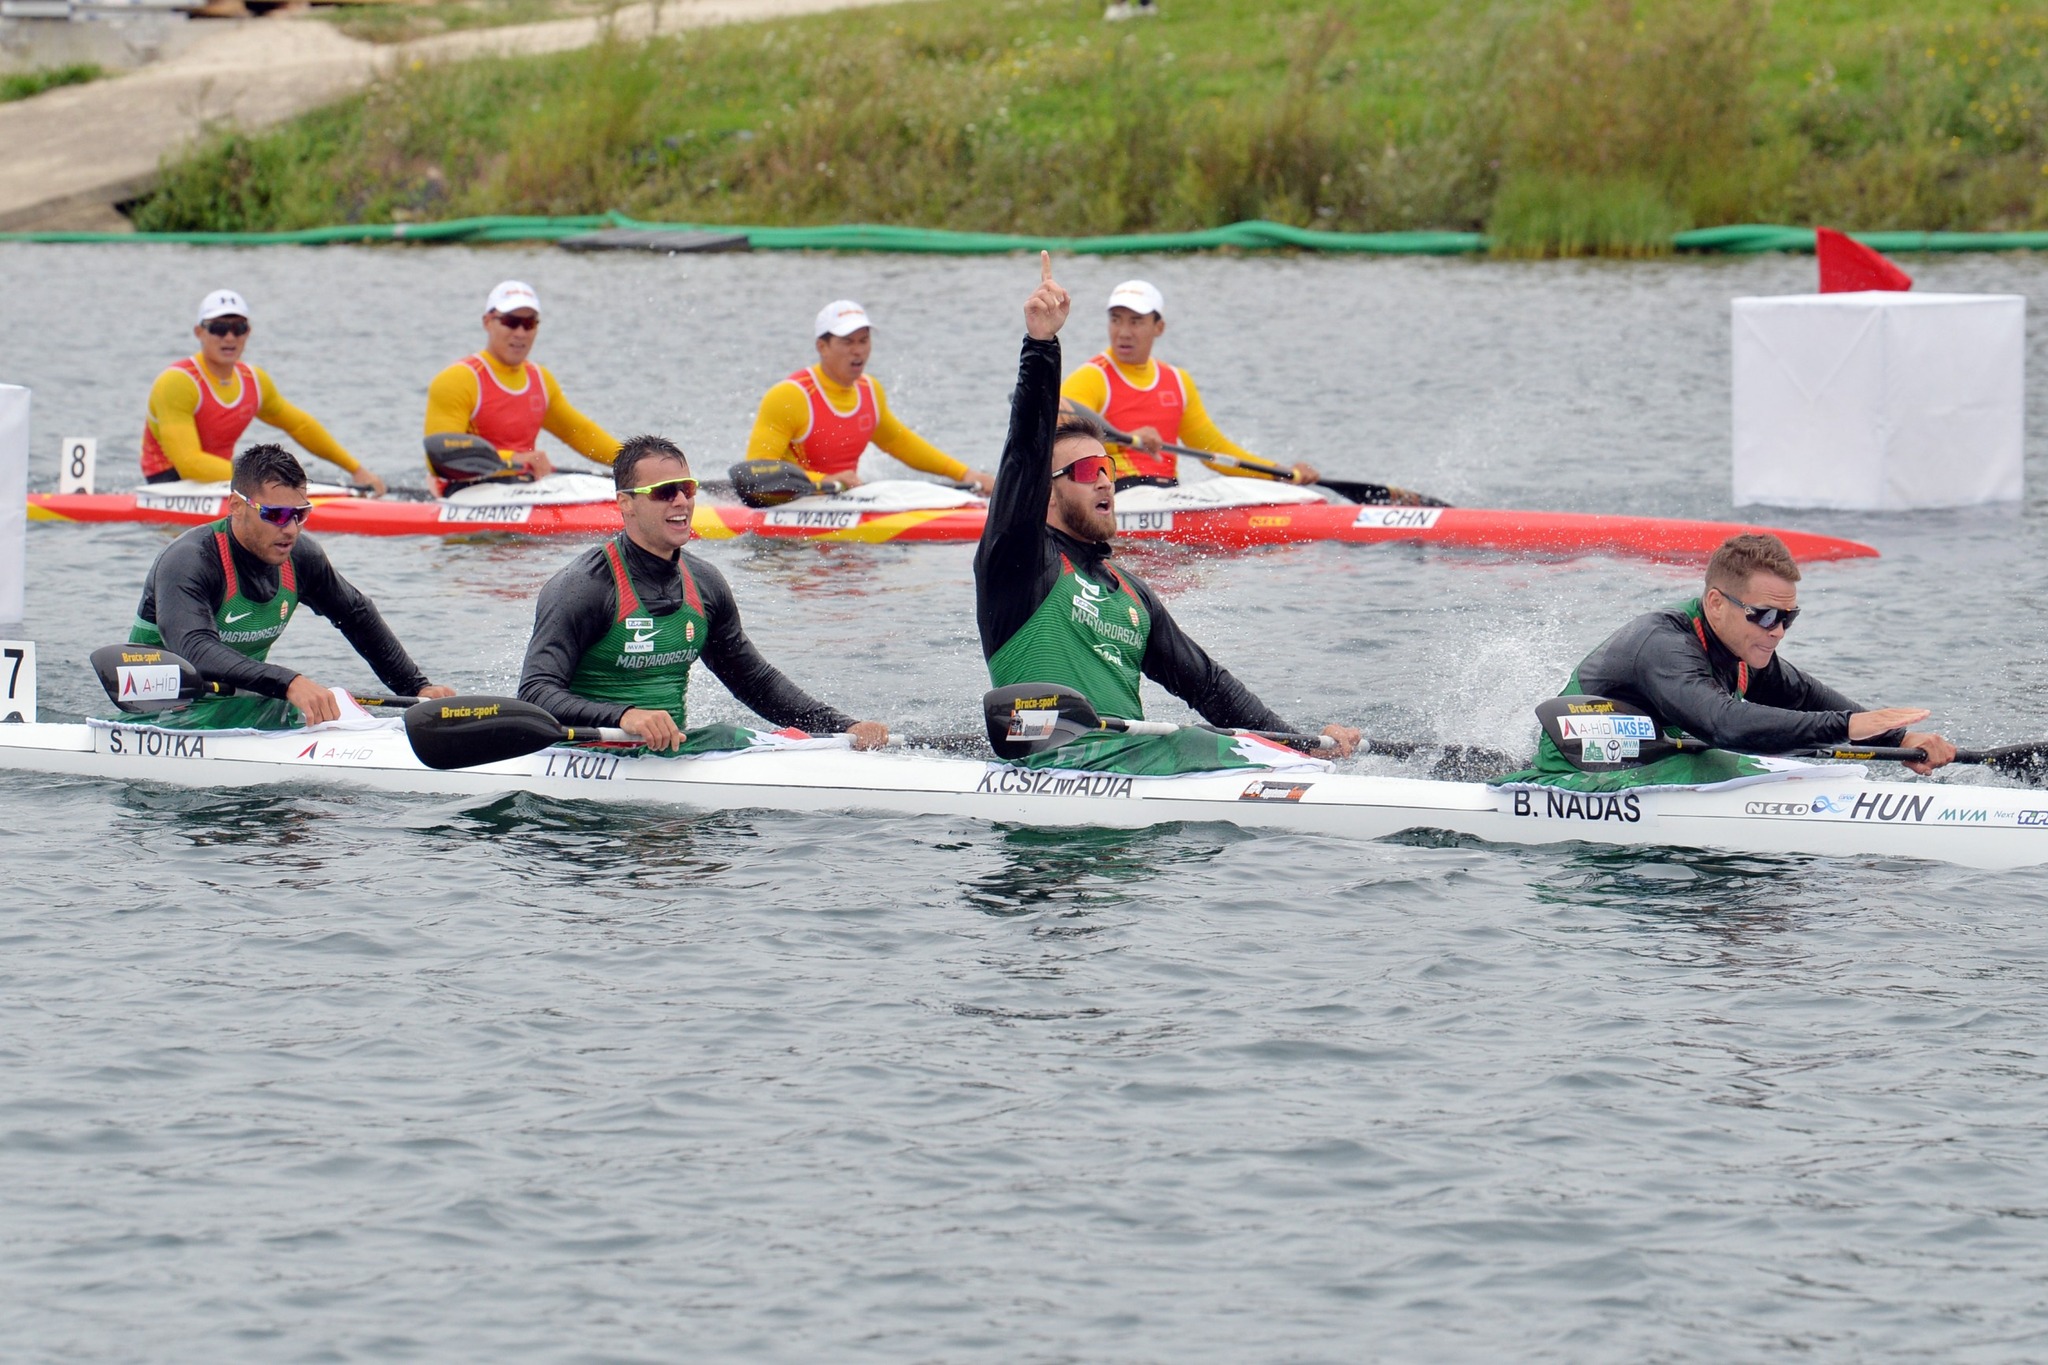 Szeged Hosts European Canoe Sprint Championships Again after 22 Years